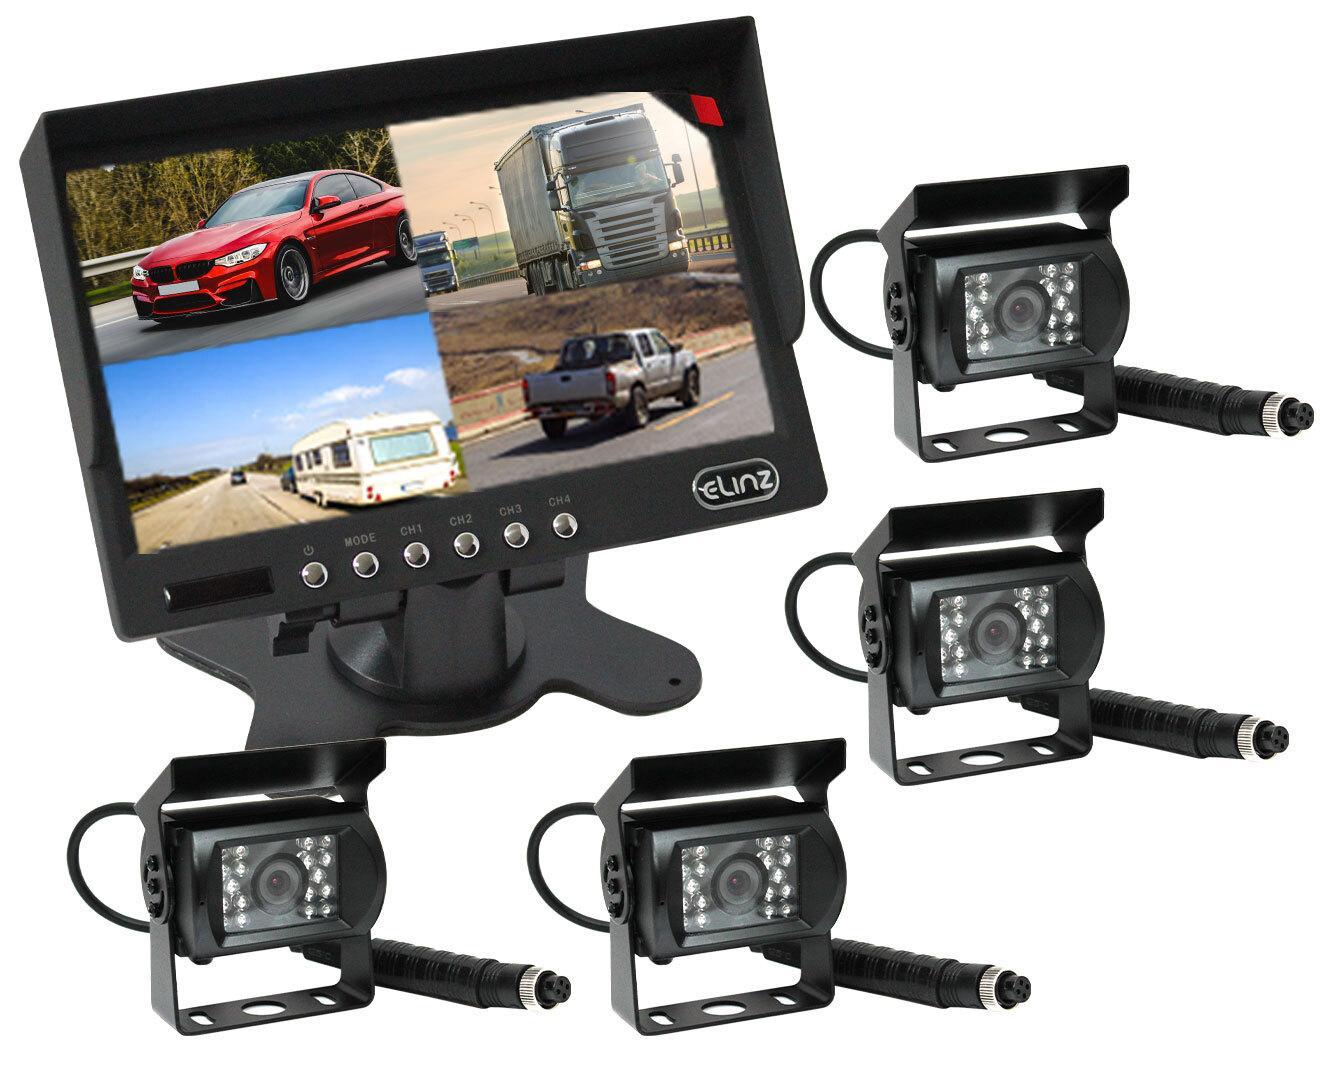 Elinz 7" Quad Monitor Splitscreen with 4 Cameras Package